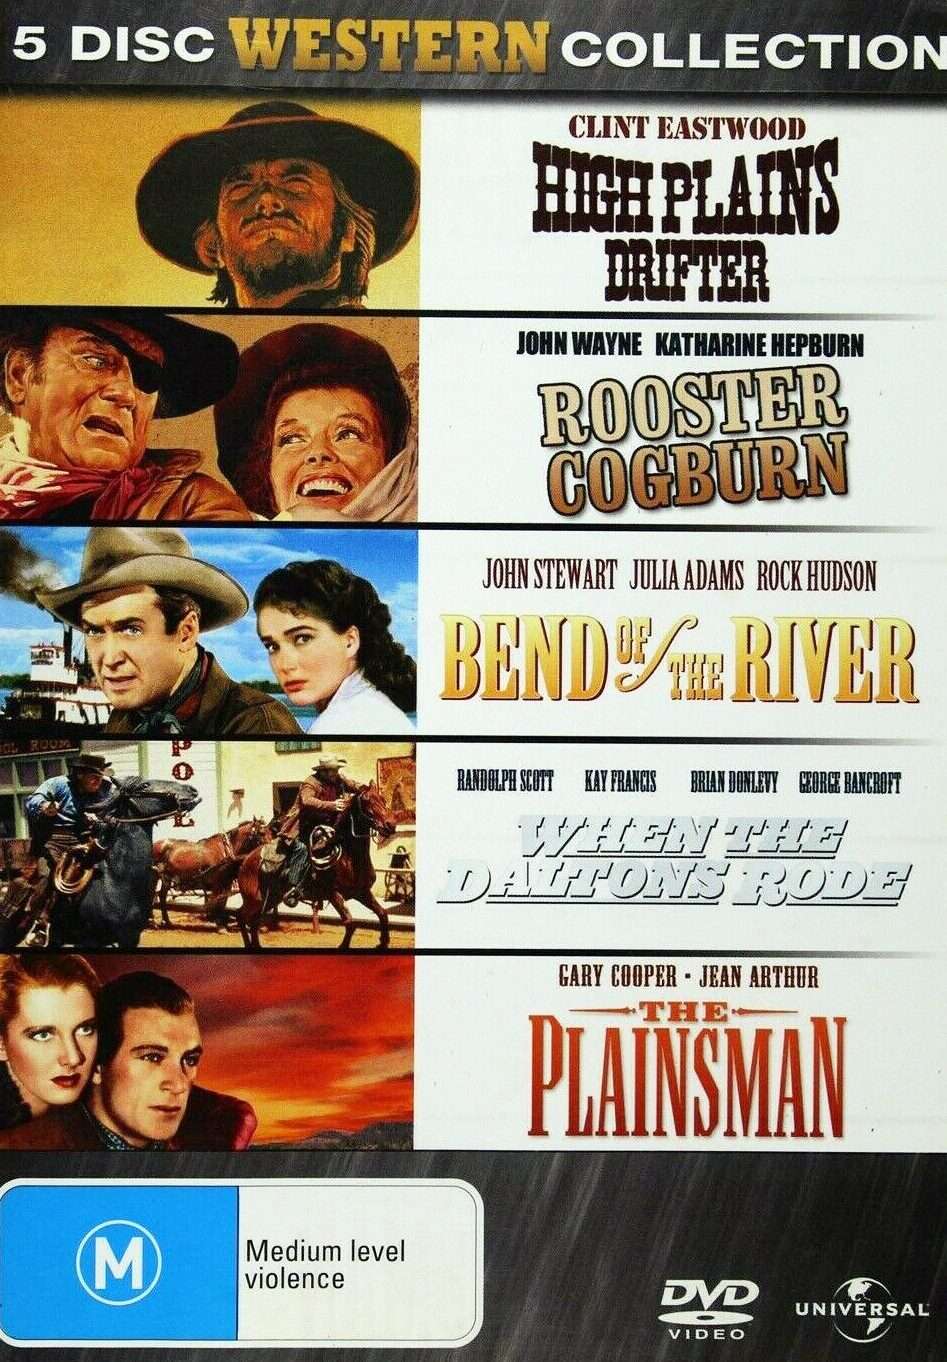 High Plains Drifter/Rooster Cogburn/Bend in the River/When the Daltons Rode/ The